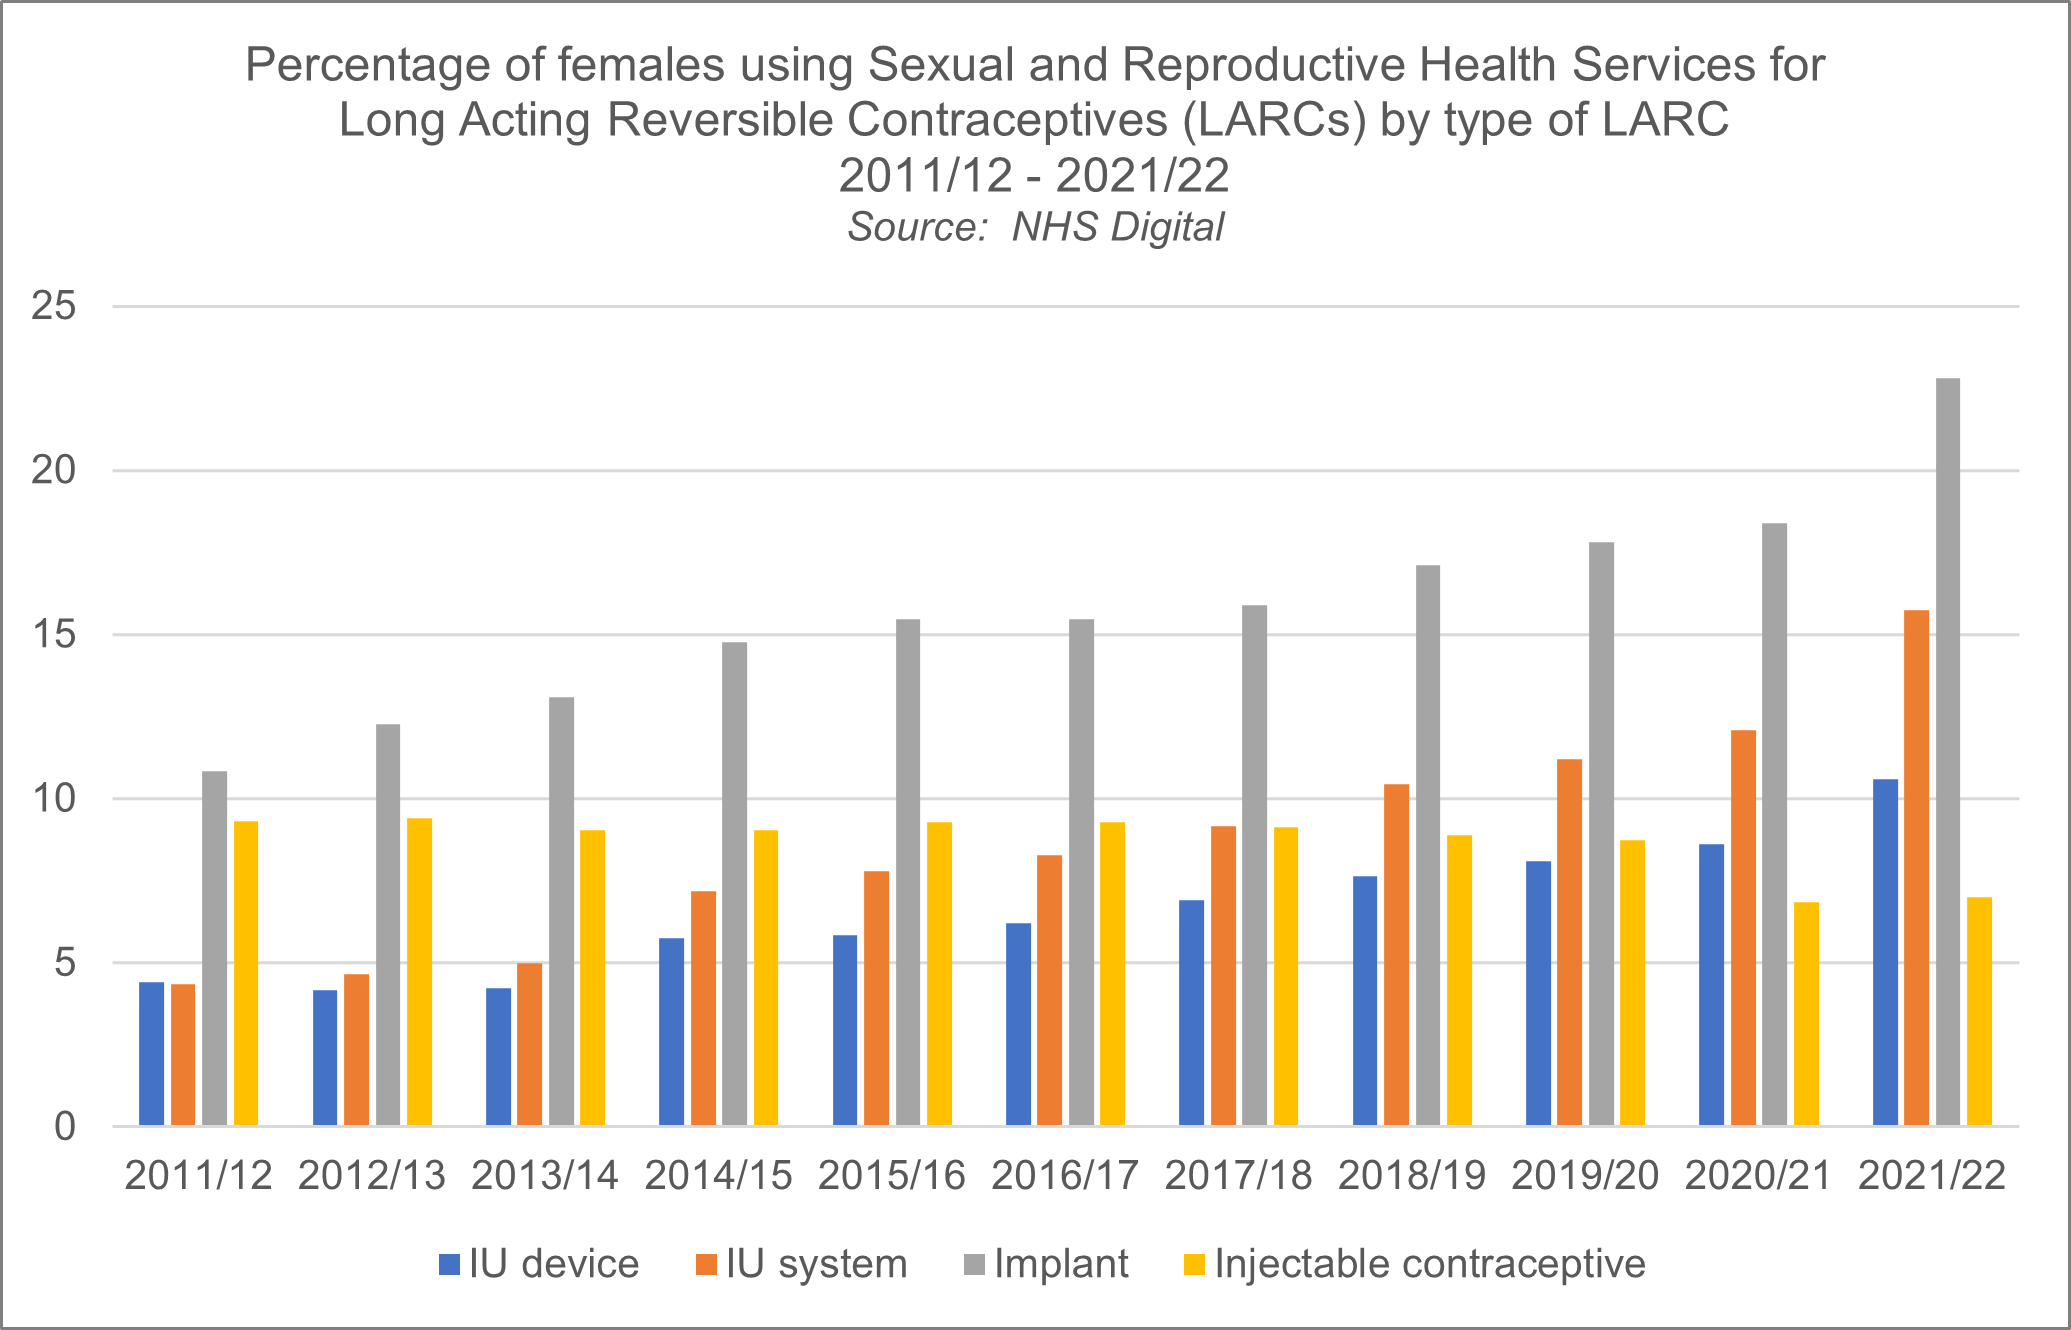 This chart shows the percentage of females using sexual and reproductive health services for Long Acting Reversible Contraception (LARC) as their main method of contraception, displayed by type of LARC between 2012 and 2021. The types of LARC include the Intrauterine Device (IUD), the Intrauterine System (IUS), the Implant and the Injectable Contraceptive.  In 2011/2012, approximately 28% of females who used sexual health services to access contraception chose LARCS as their main method of contraception. 